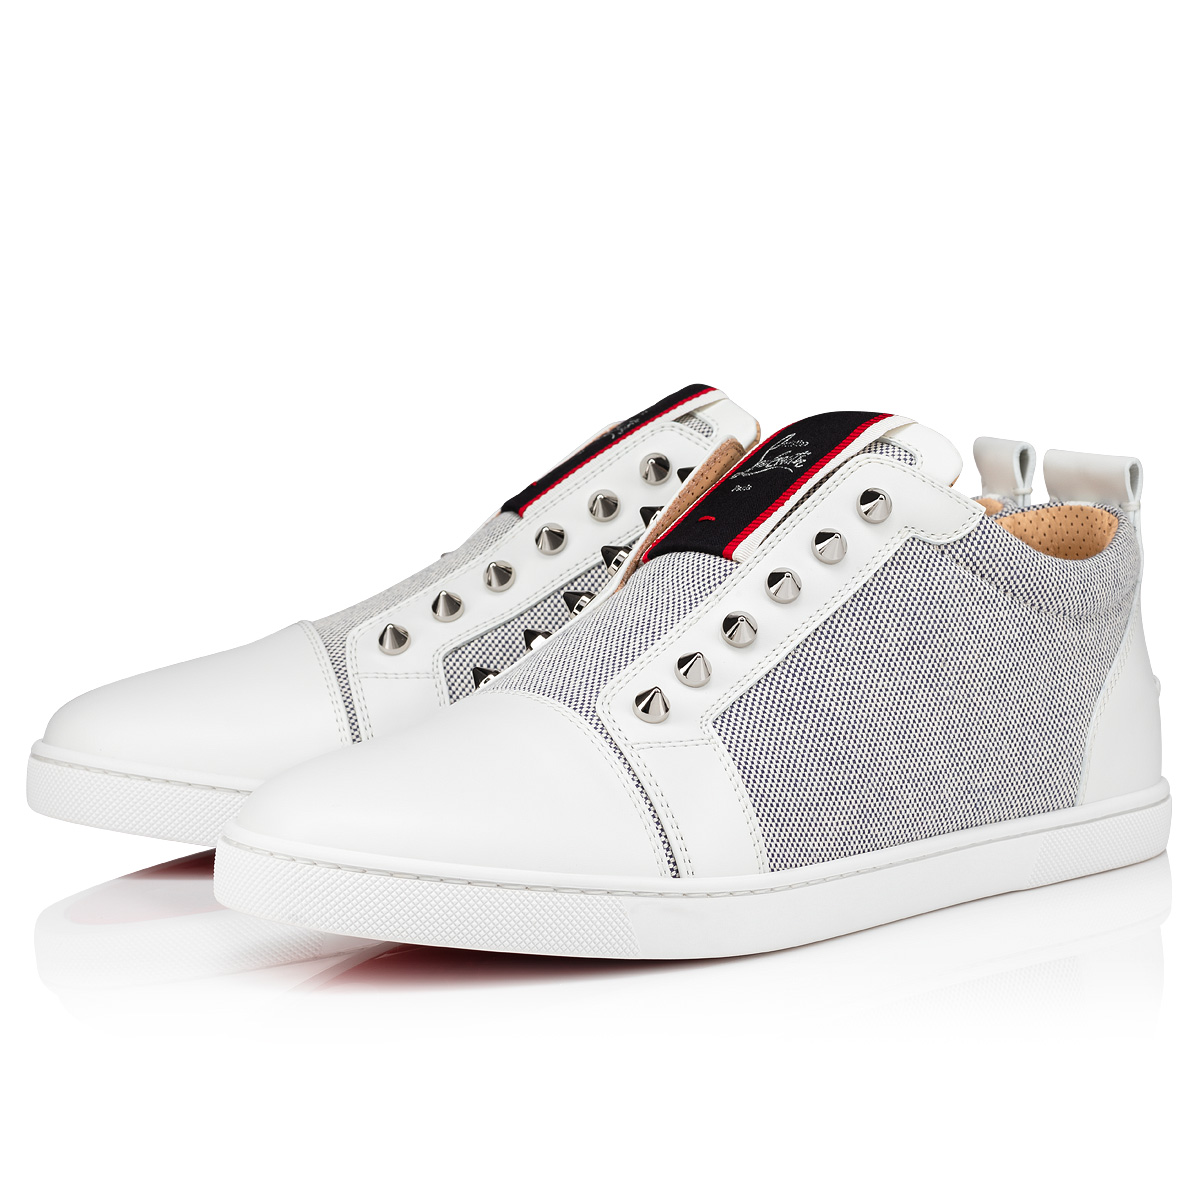 F.A.V Fique A Vontade woman - Sneakers - Calf leather - White - Christian  Louboutin